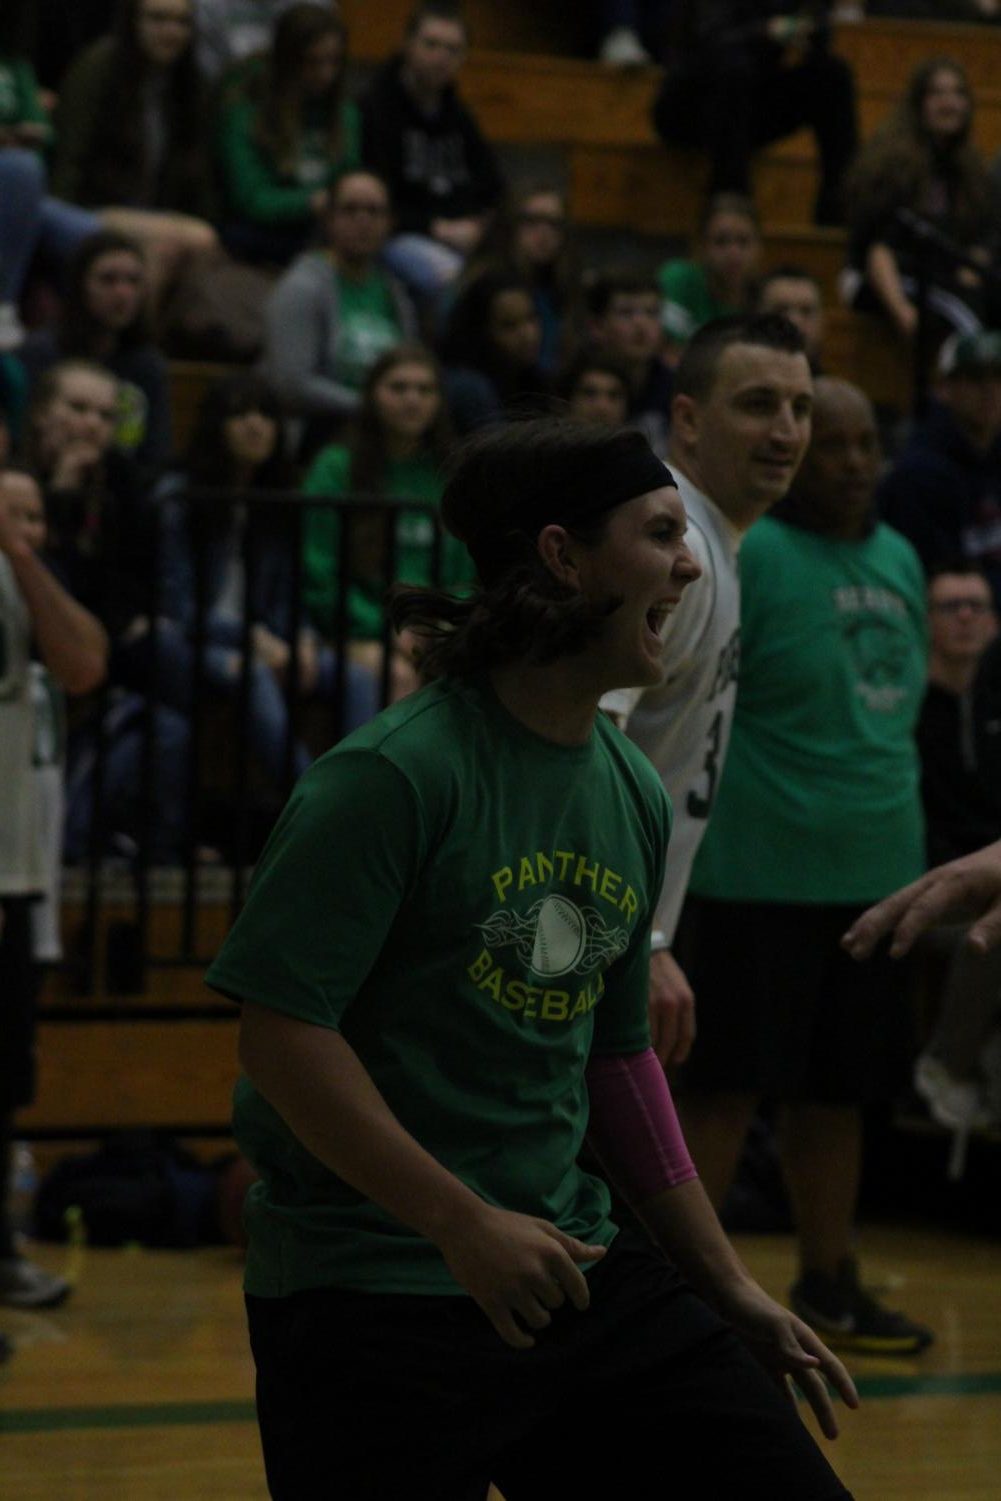 Seniors+vs.+staff+basketball+game+%28Photos+by+Abby+Glanville%29